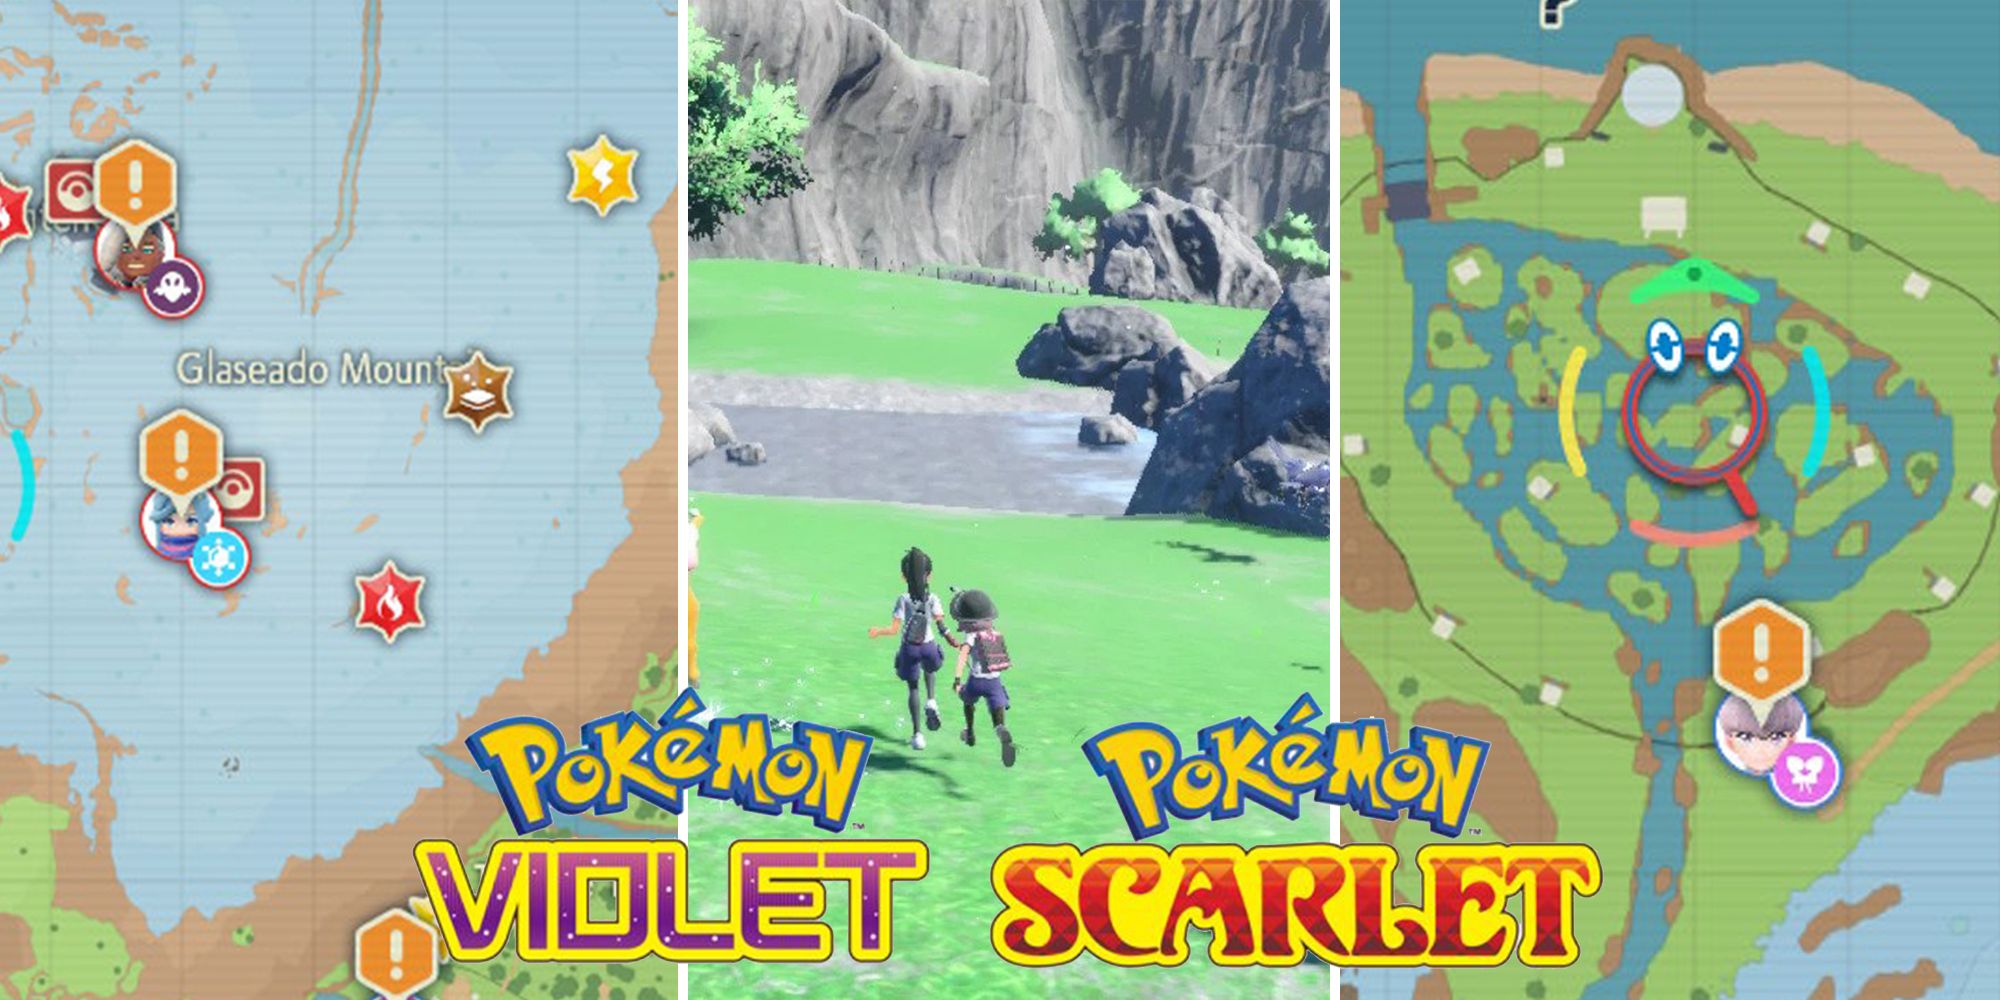 A split image featuring Pokemon Scarlet and Violet's in-game map and and two characters running